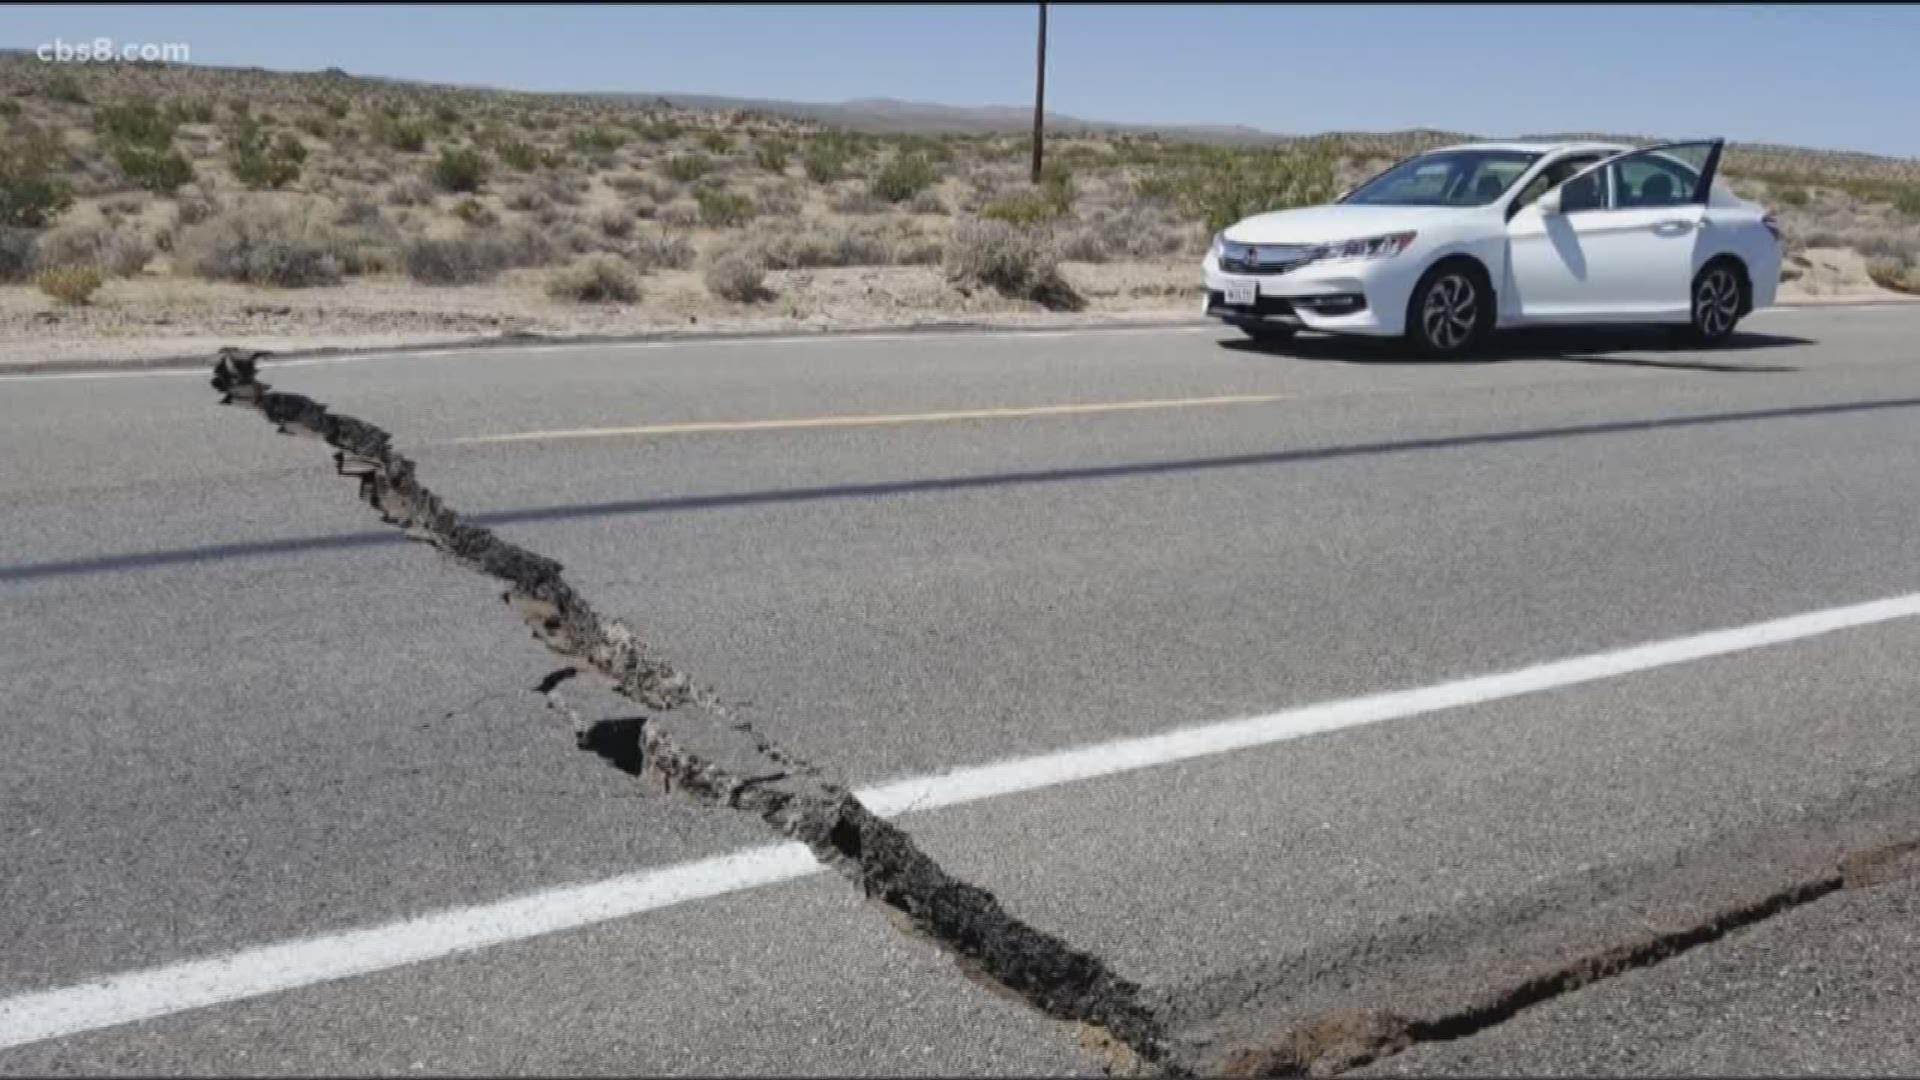 A magnitude 6-4 earthquake was felt throughout the Southern California Thursday, shaking up local residents celebrating the Fourth of July. The quake, which began at 10:35 a.m., was centered about 7 miles southwest of Searles Valley, a sparsely populated part of the Mojave Desert in northwestern San Bernardino County, according to the U.S. Geological Survey.